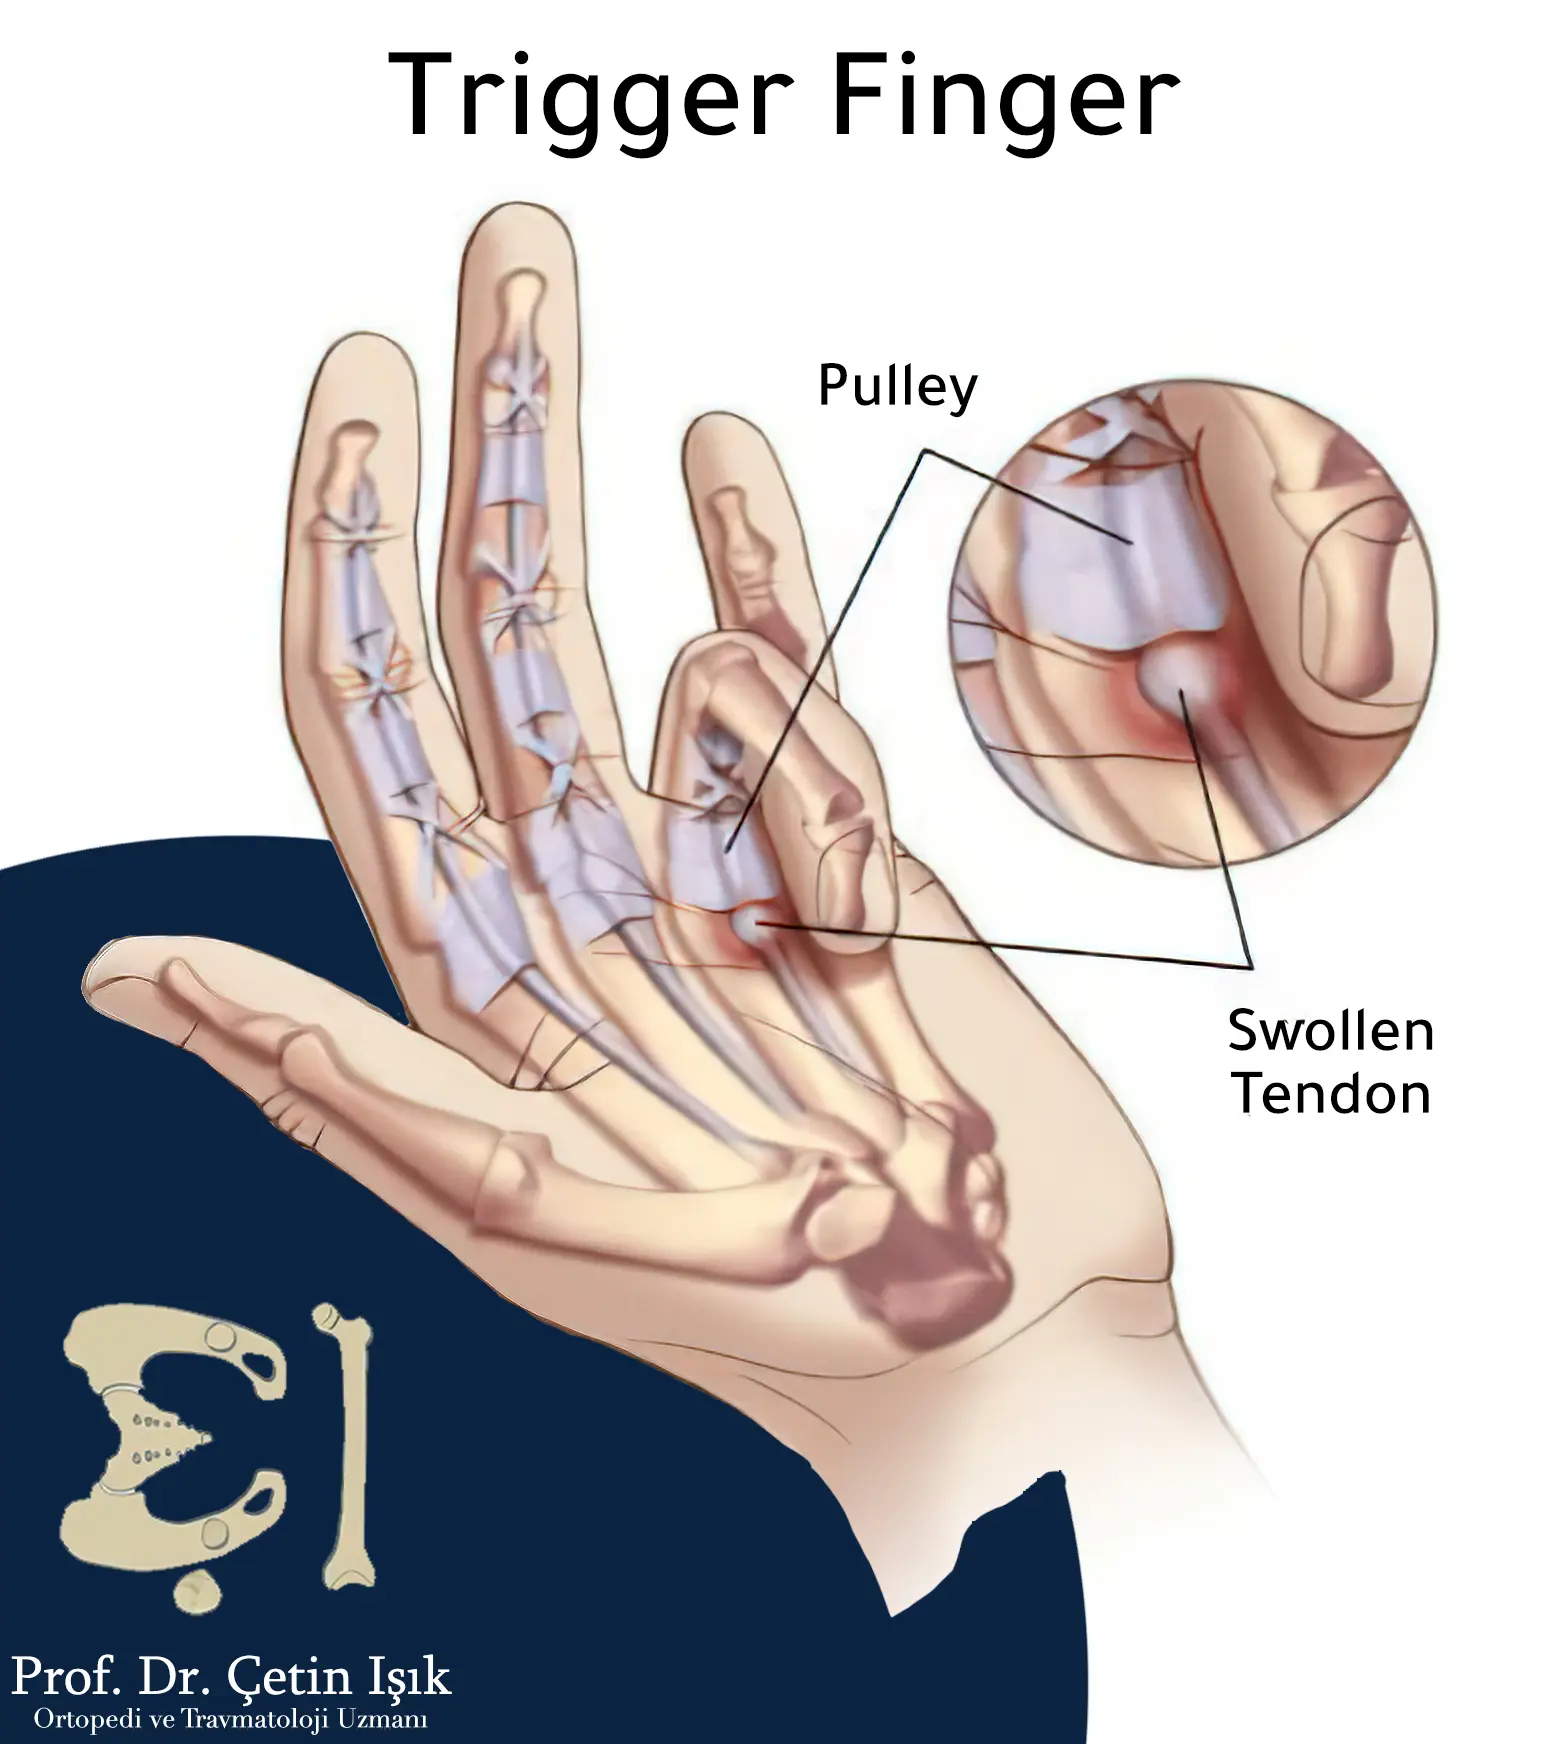 An image expressing the state of the trigger finger or the firing pin, and the stability of the finger in the bent position